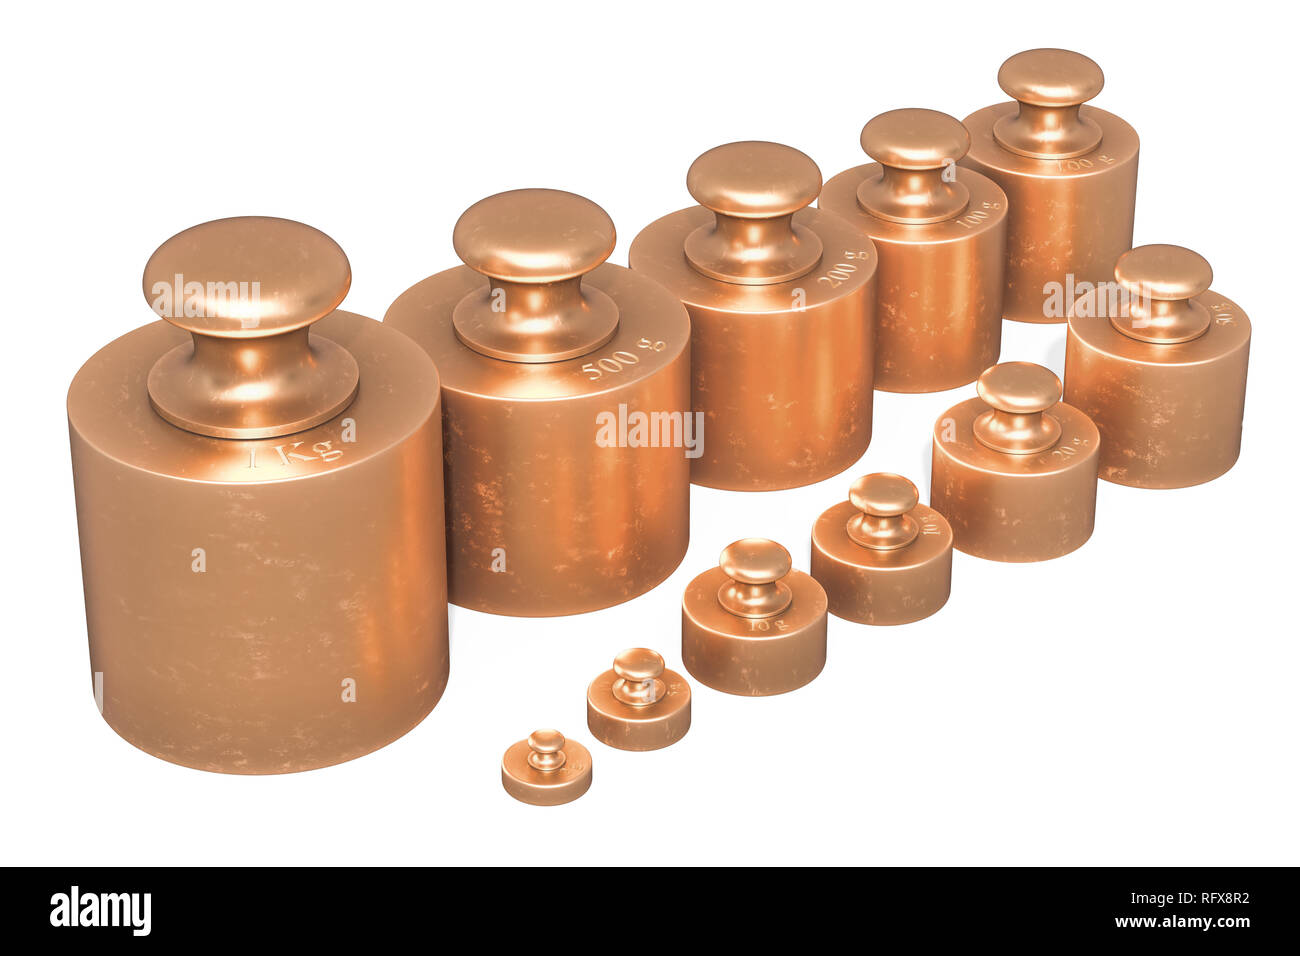 Scale Calibration Weights from brass, 3D rendering isolated on white background Stock Photo